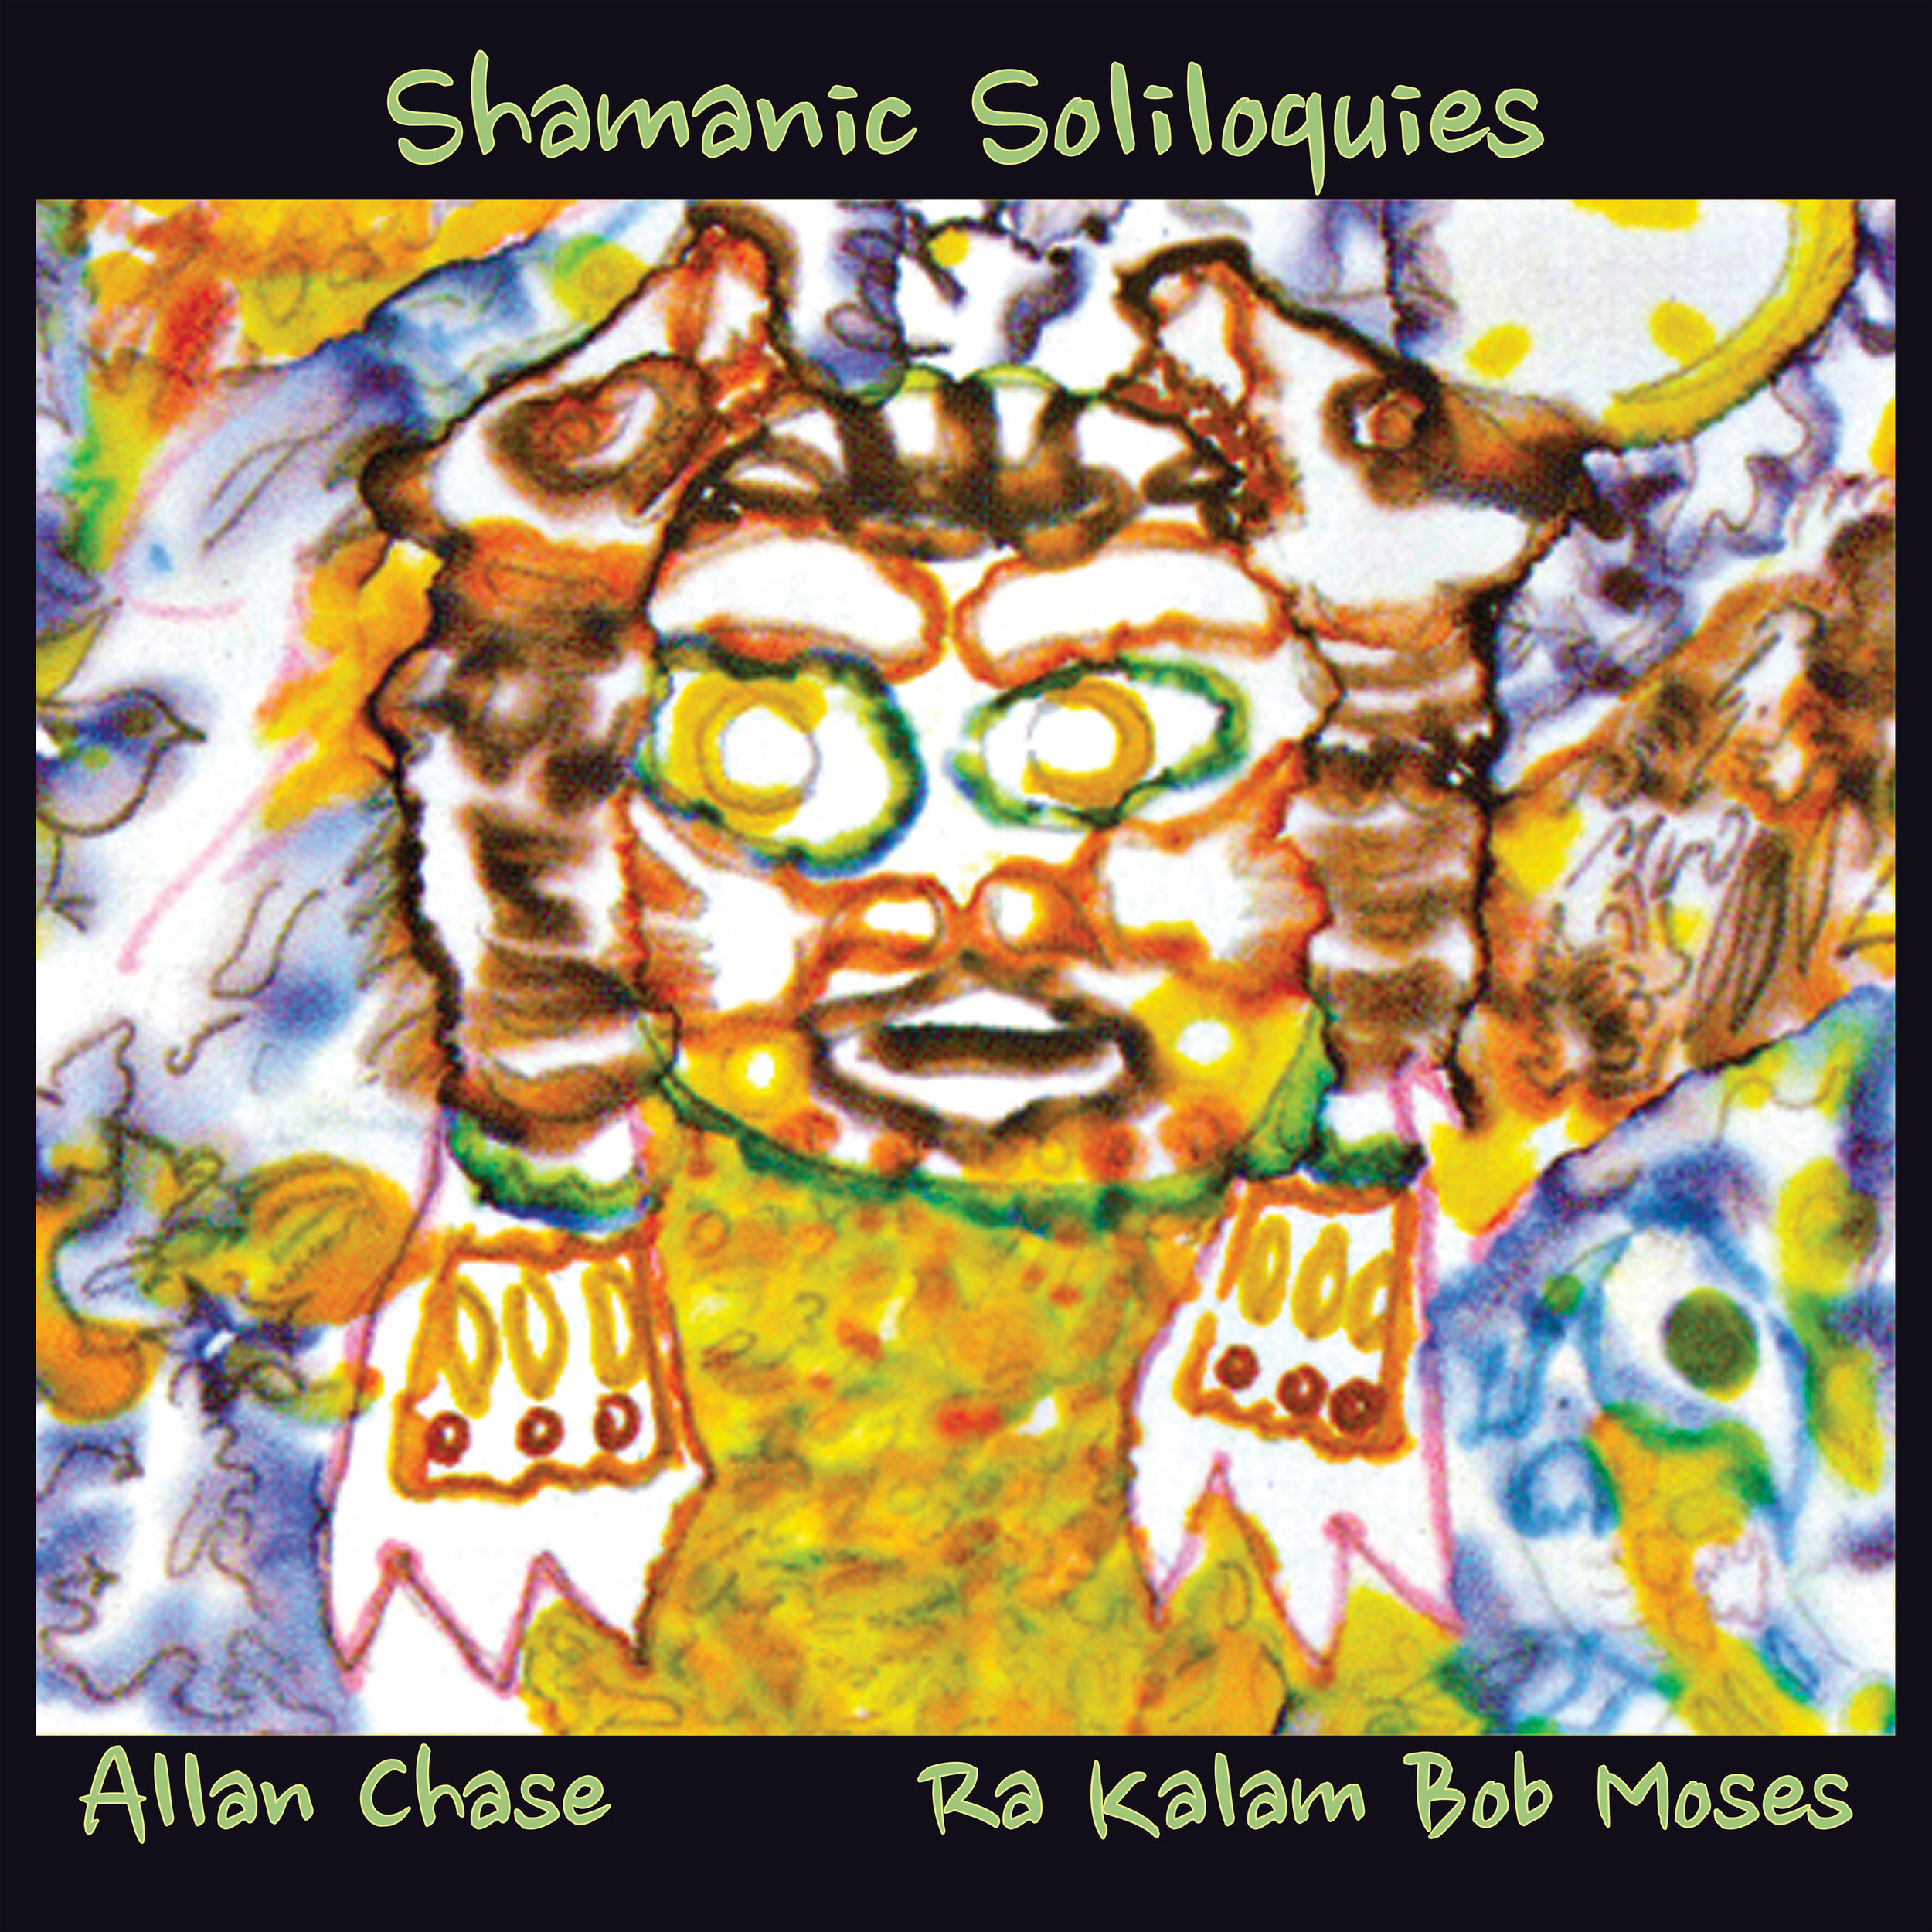   SHAMANIC SOLILOQUIES    Compact Disc -    E-mail your order     Digital -    Amazon     Release Date - 2018    Label - Ra Kalam Records    Allan Chase - Alto, soprano and baritone saxophones    Ra Kalam Bob Moses - Drums, djembe, talking drum, pans